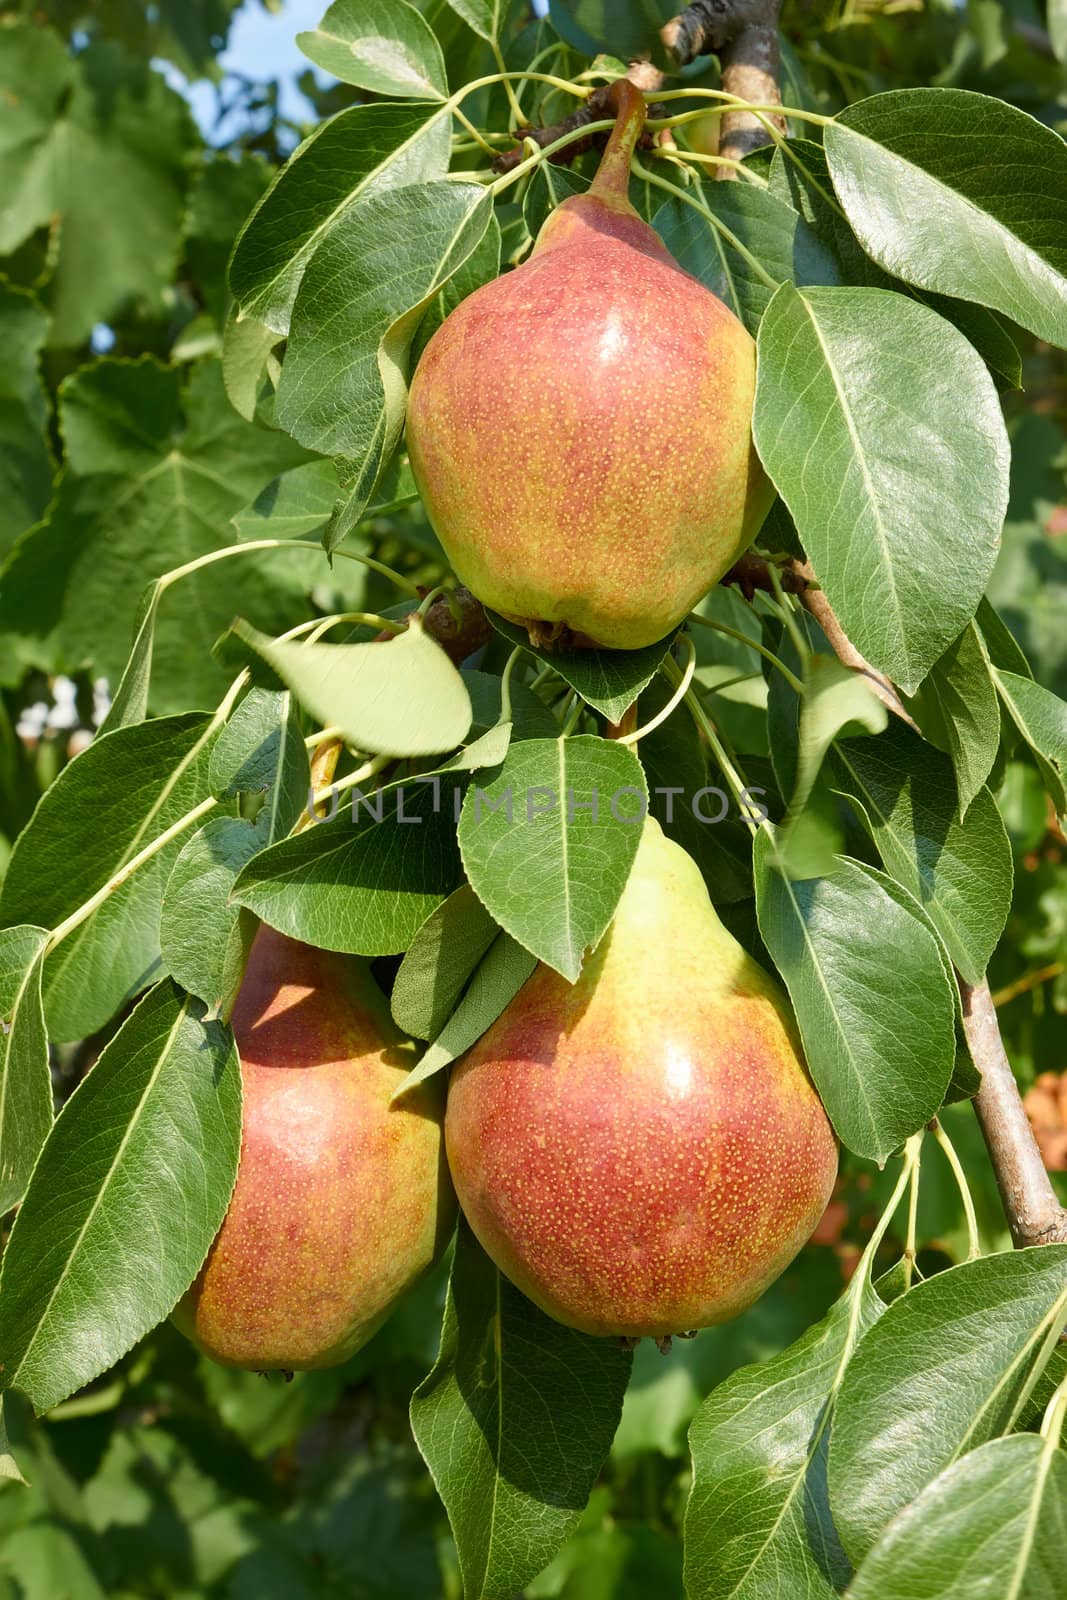 Ripe pear fruit hanging on a tree branch in the bright sunlight. Close-up